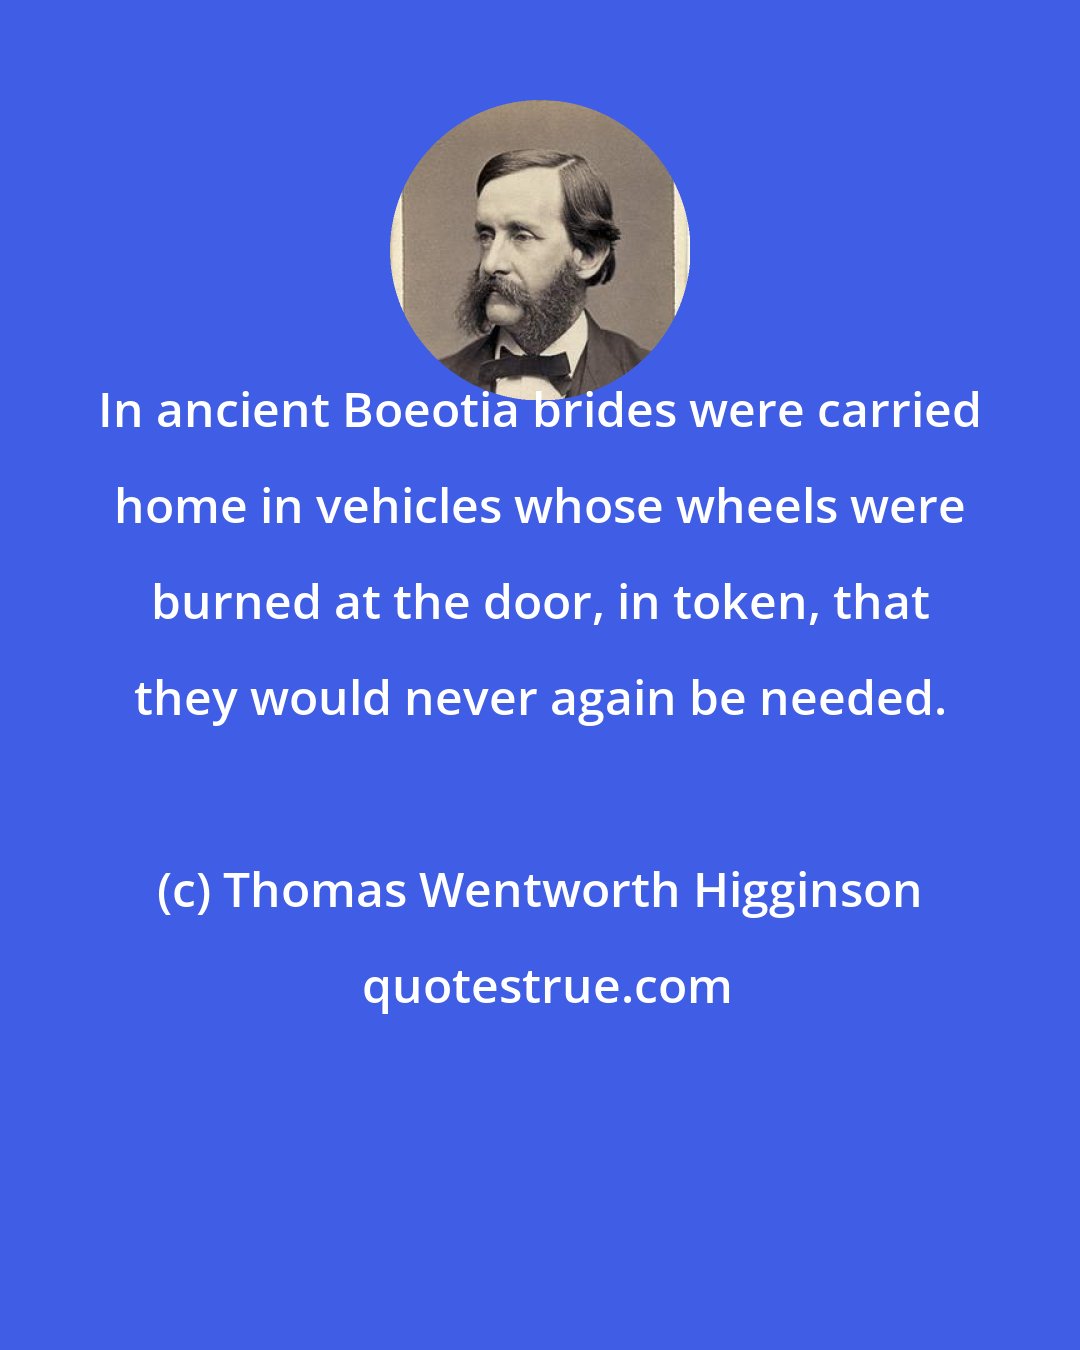 Thomas Wentworth Higginson: In ancient Boeotia brides were carried home in vehicles whose wheels were burned at the door, in token, that they would never again be needed.